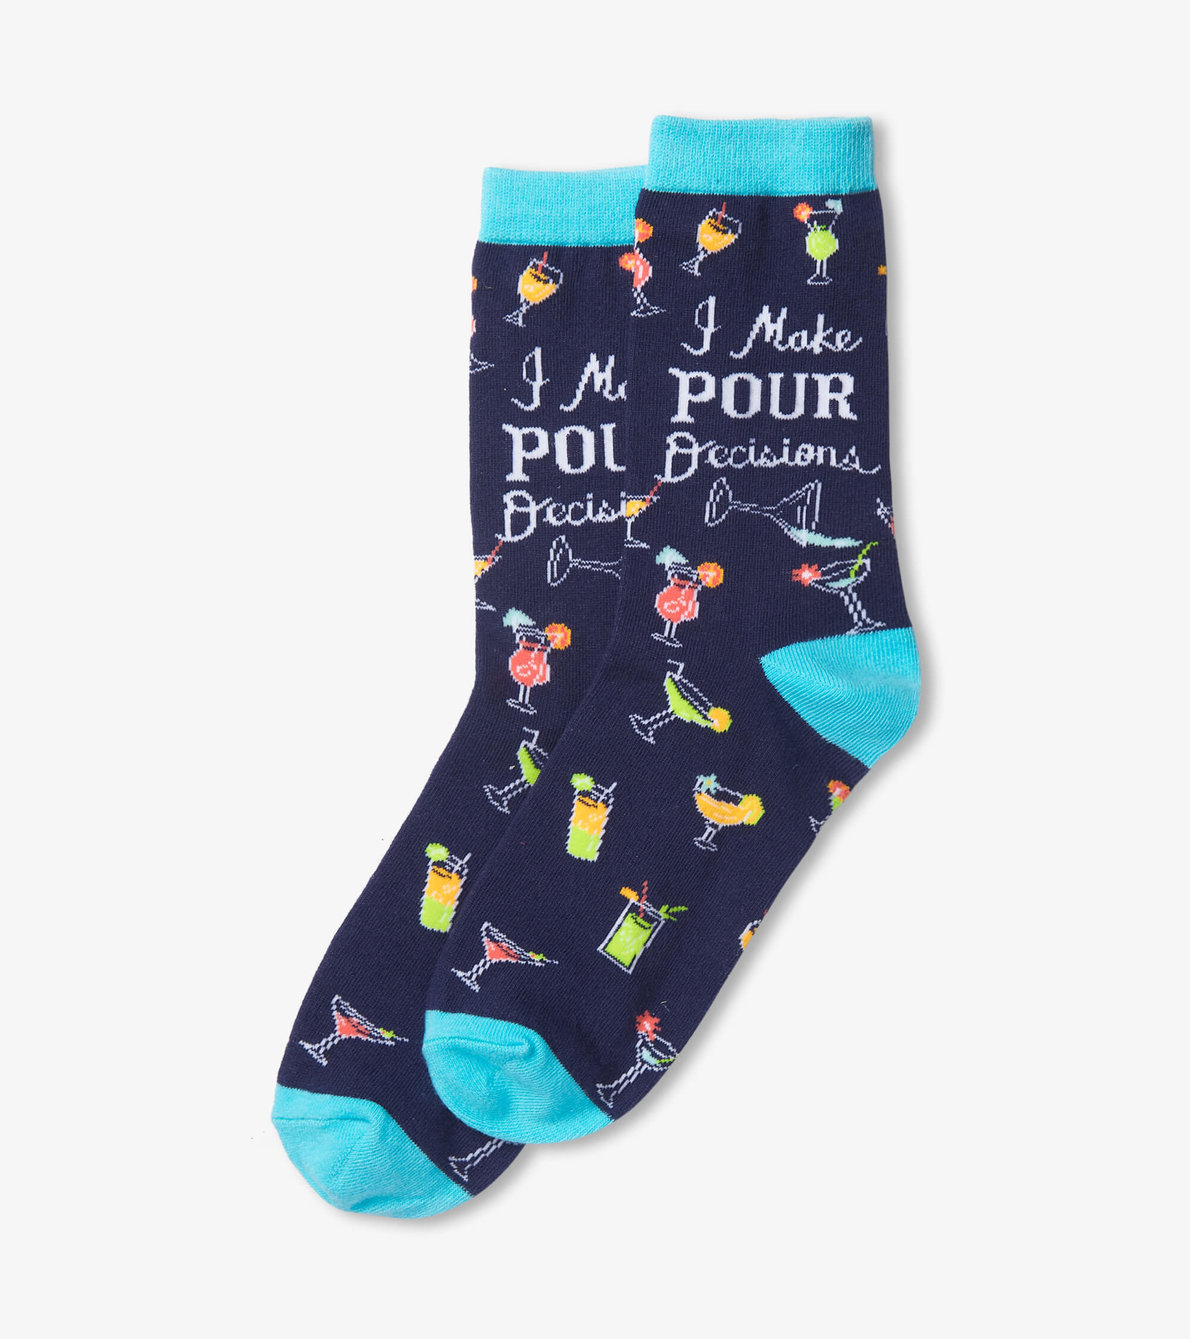 View larger image of Pour Decisions Women's Crew Socks